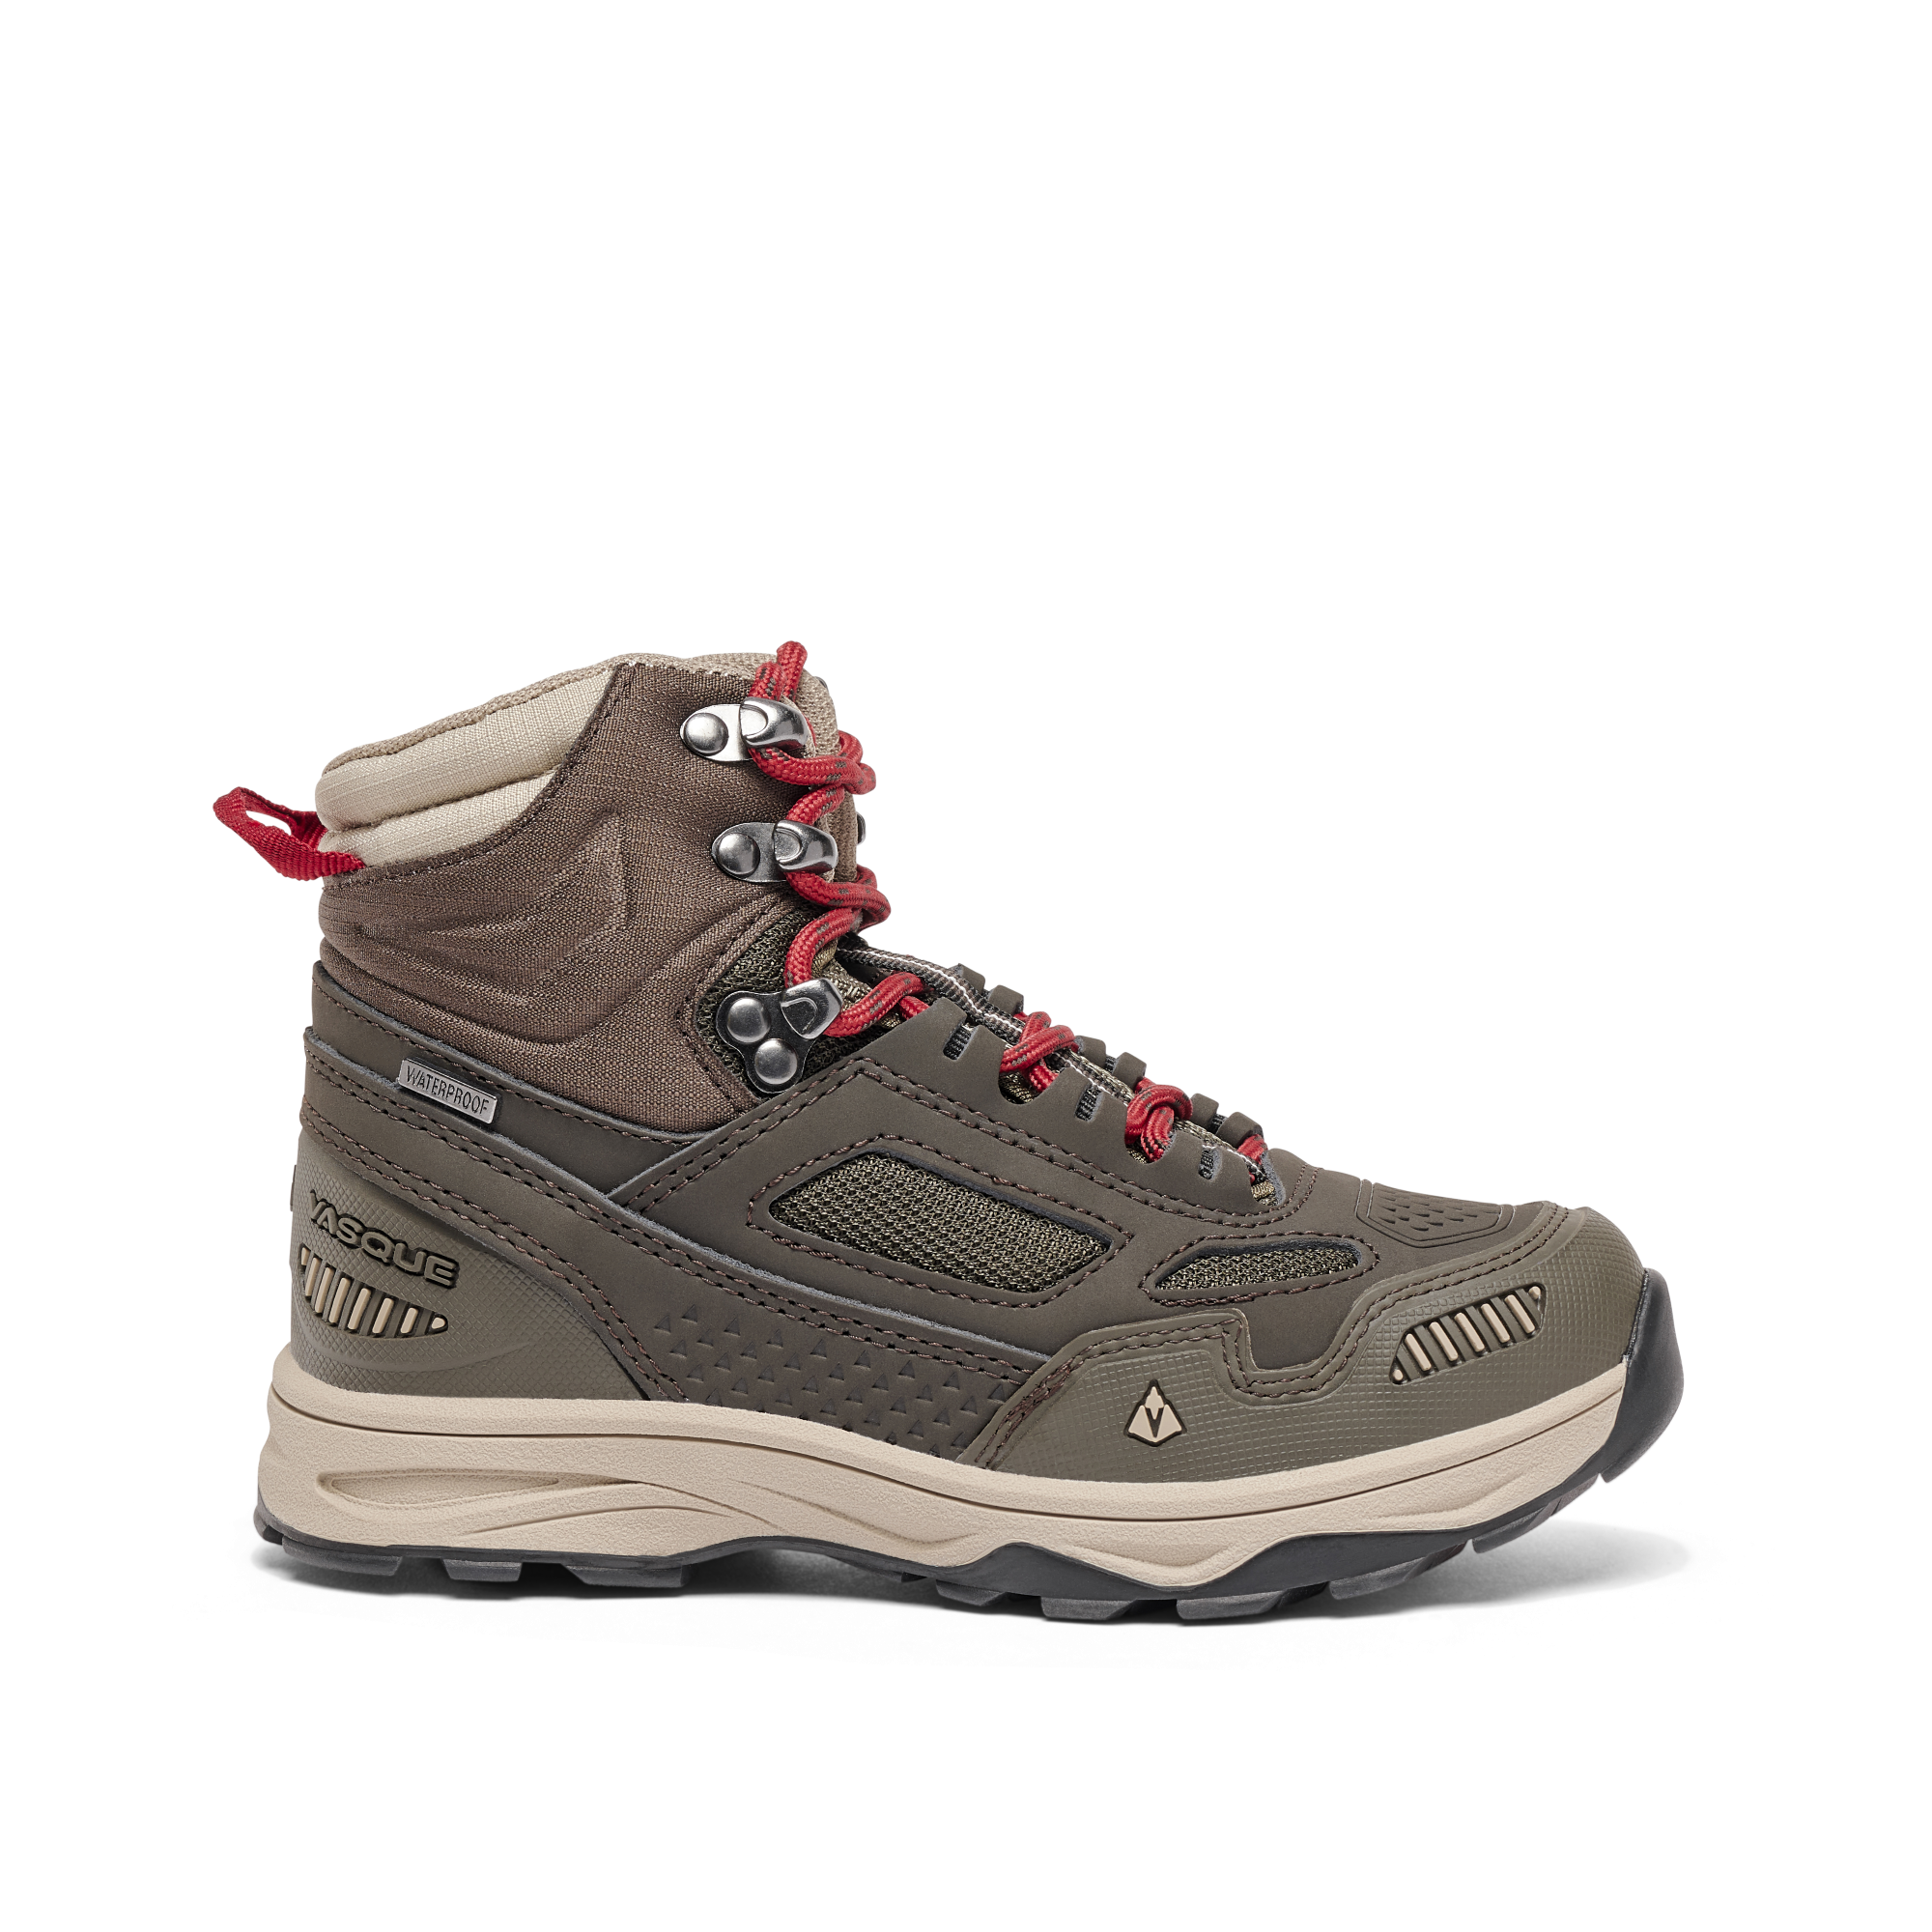 Vasque Breeze AT UltraDry Waterproof Hiking Boots for Kids - Olive - 2 Kids